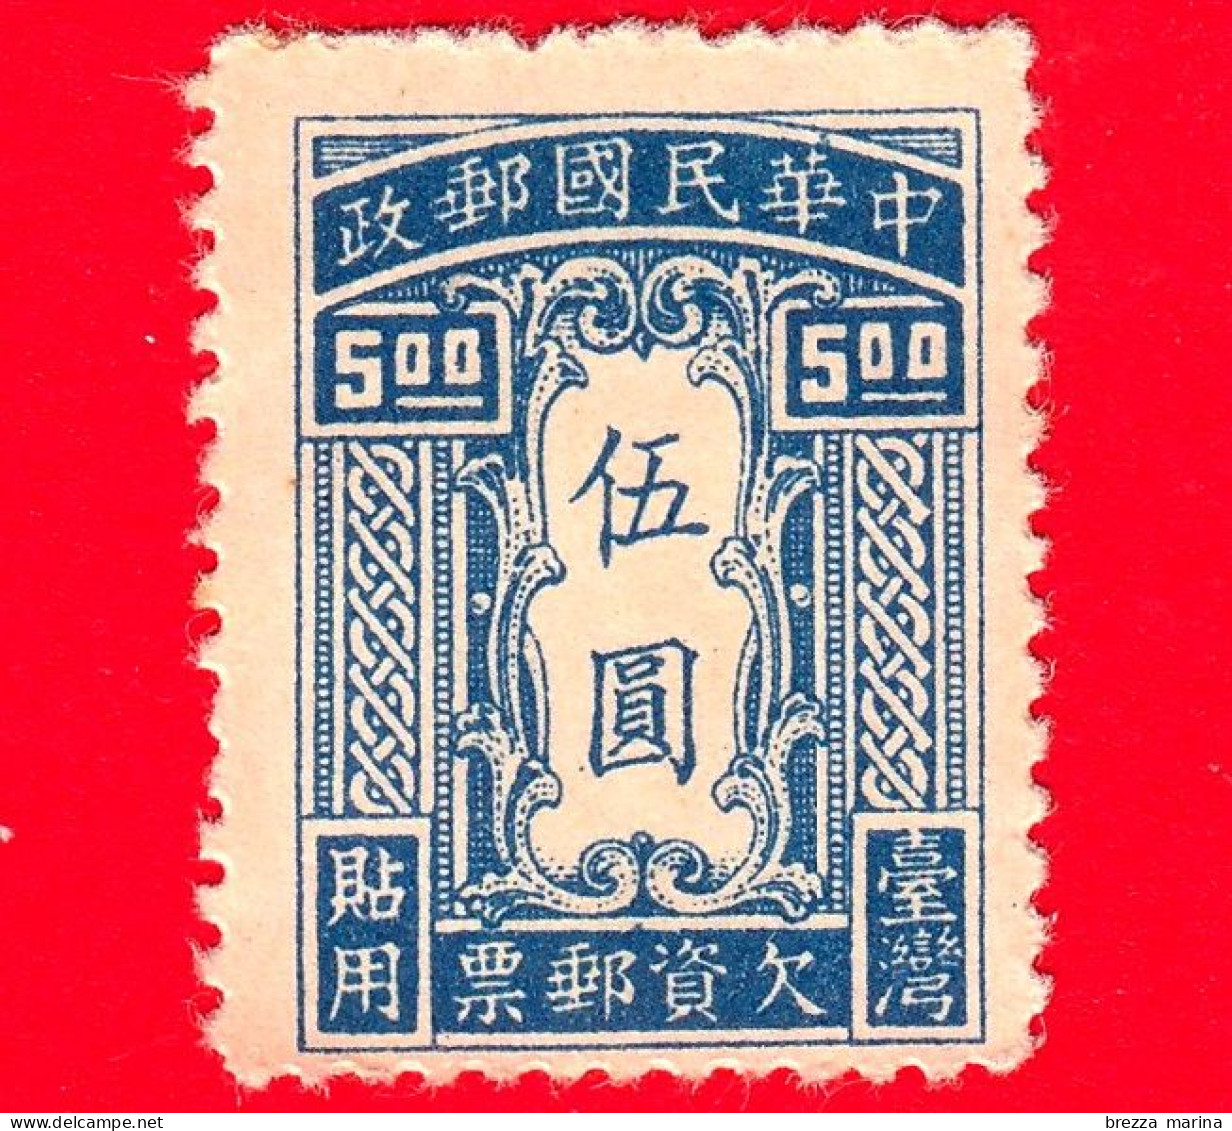 TAIWAN  - Repubblica Di Cina - Usato - 1948 - Segnatasse - Postage Due Stamps For Use In Taiwan - 5.00 - Used Stamps